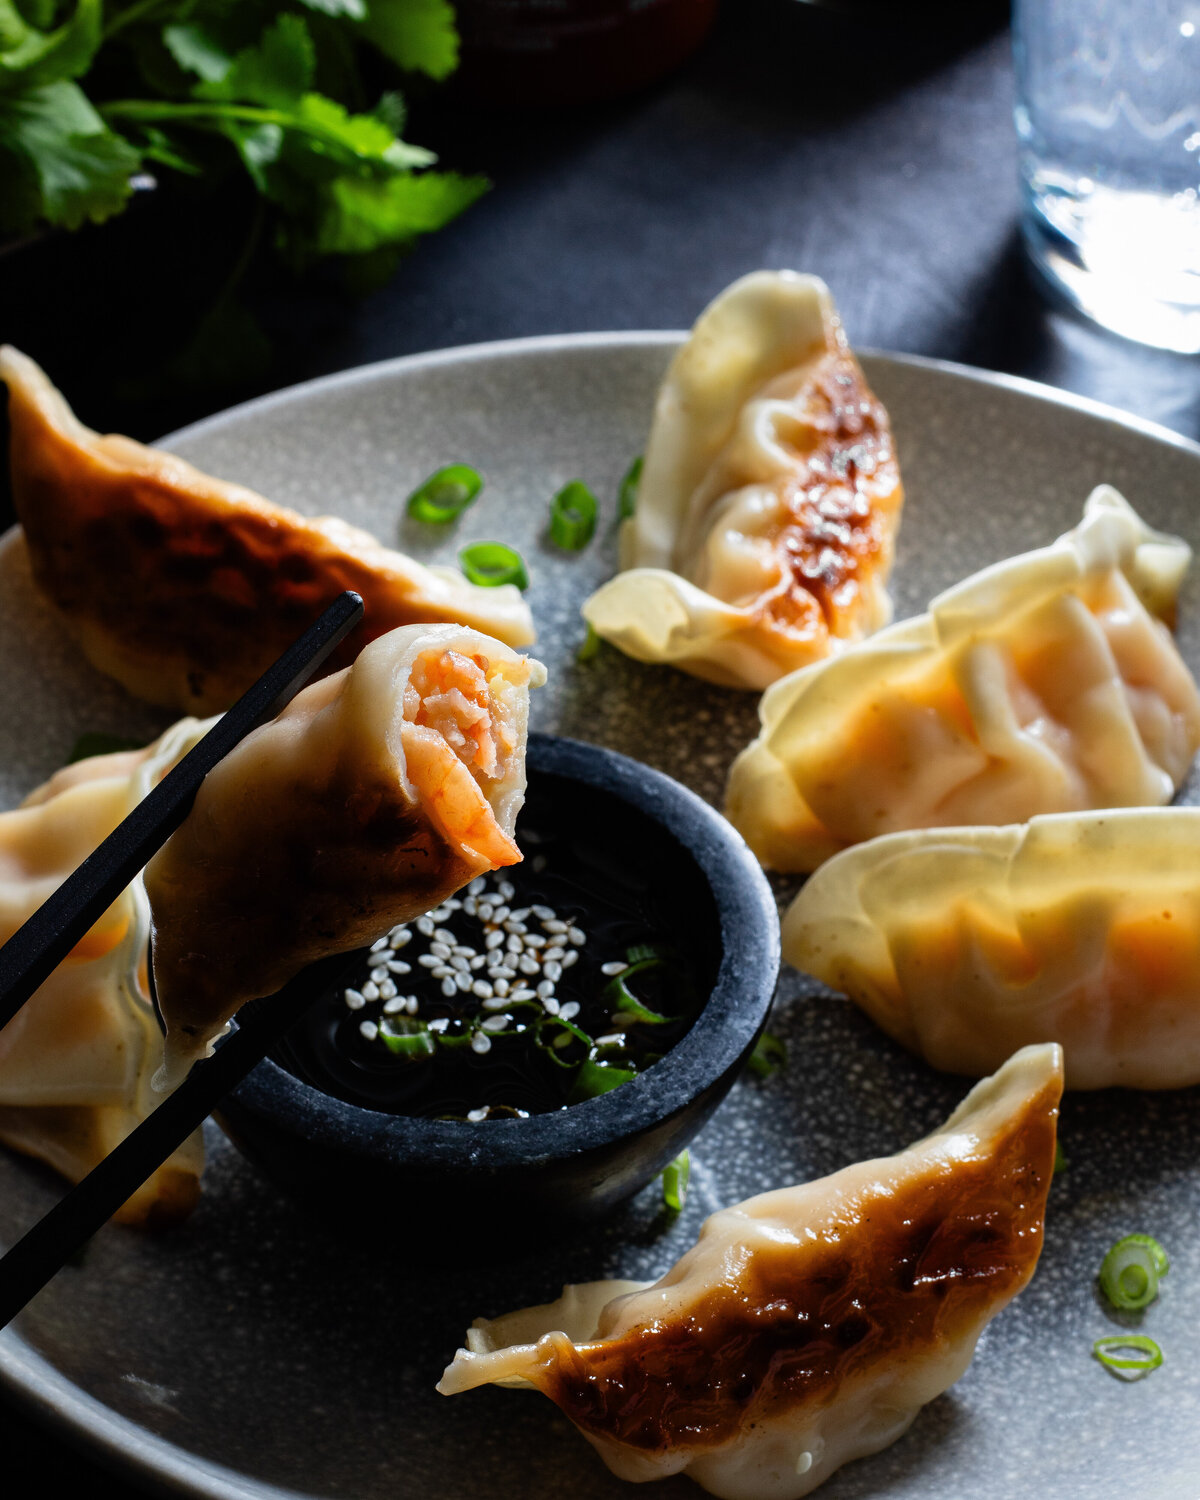 Shrip gyoza held with chopsticks over a soy sauce dip bowl